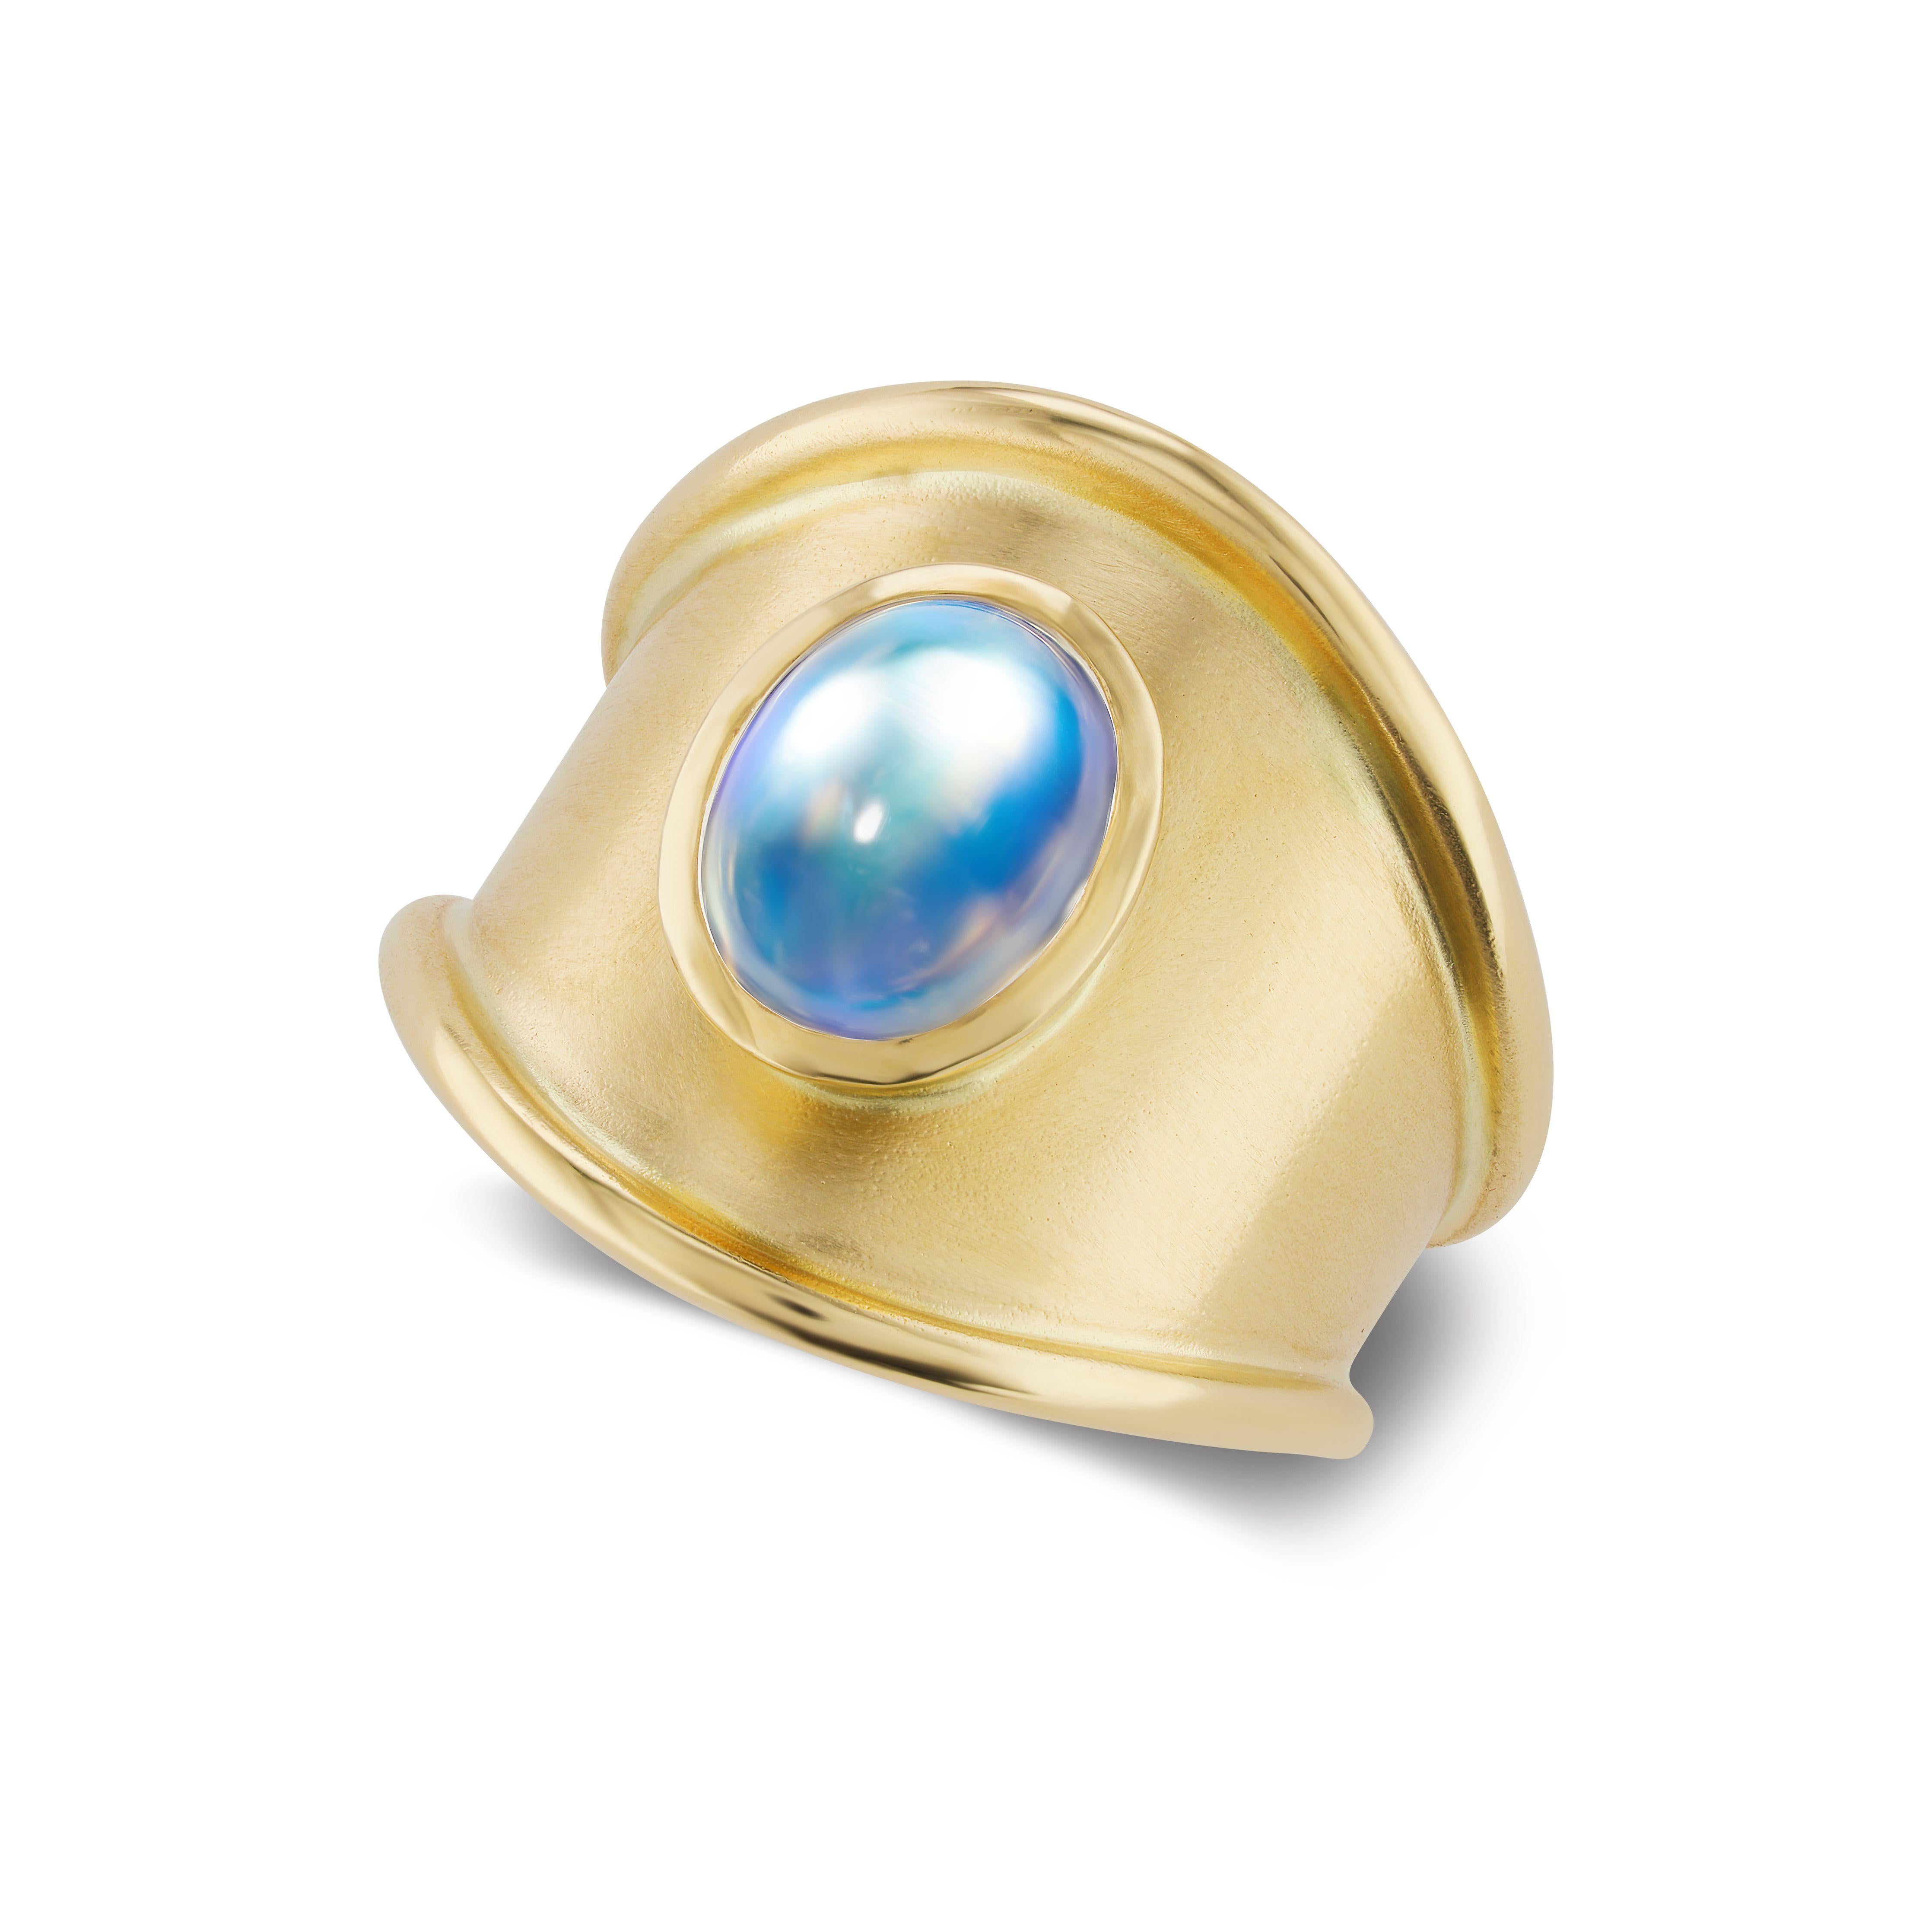 The Castle Roads Ring features a billowy blue moonstone set into a pool of lustrous 18k yellow gold.

 The Ancient Romans believed moonstones were formed from frozen beams of moonlight, and would bestow love, wisdom and good fortune on those who